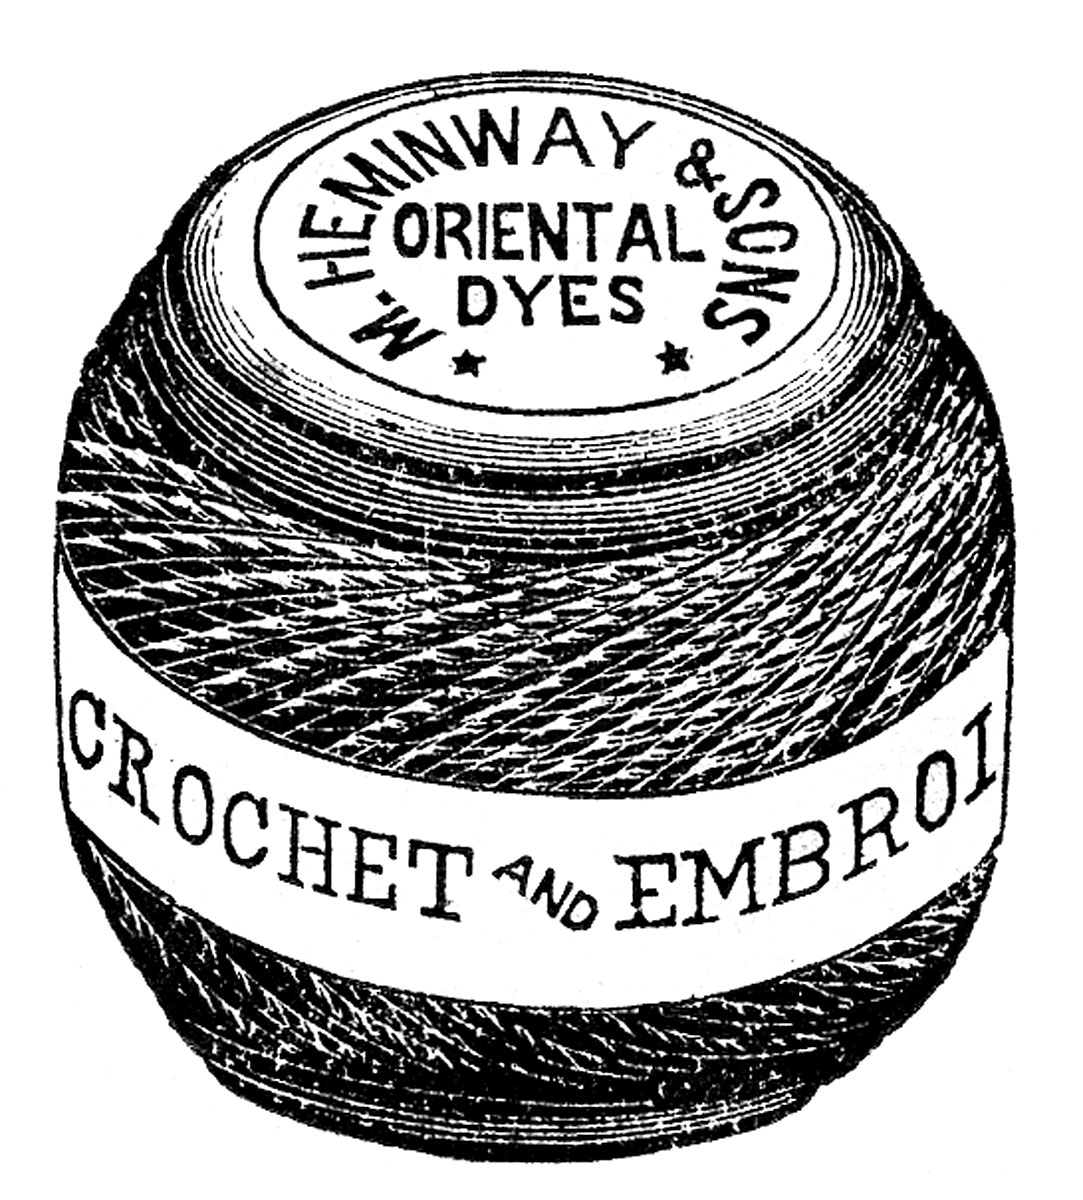 sewing clipart embroidery supply